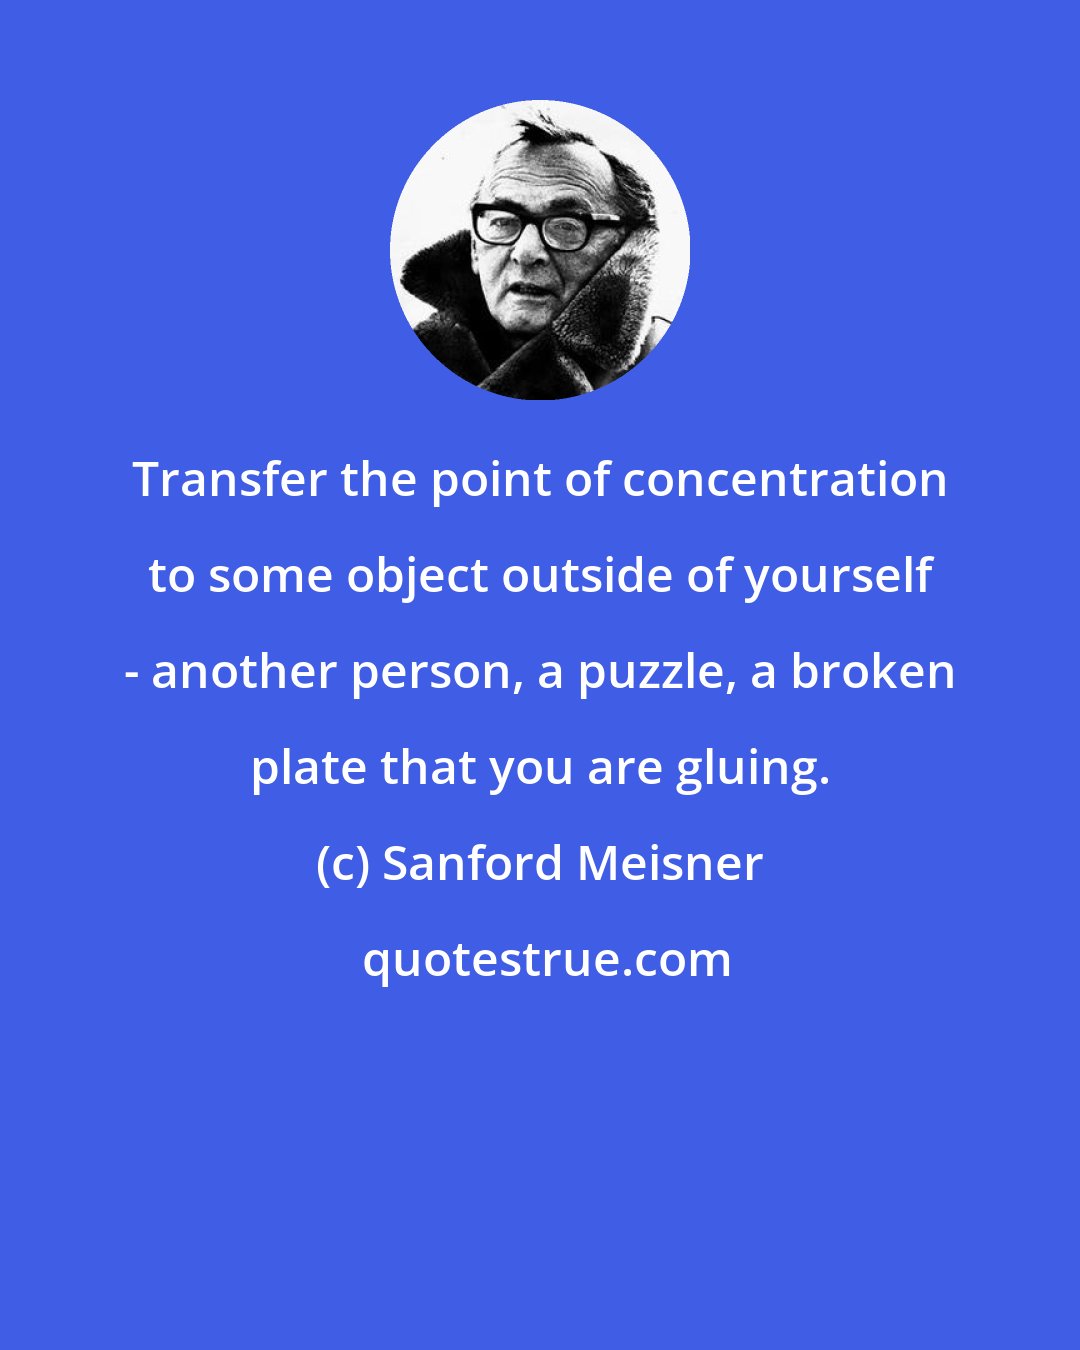 Sanford Meisner: Transfer the point of concentration to some object outside of yourself - another person, a puzzle, a broken plate that you are gluing.